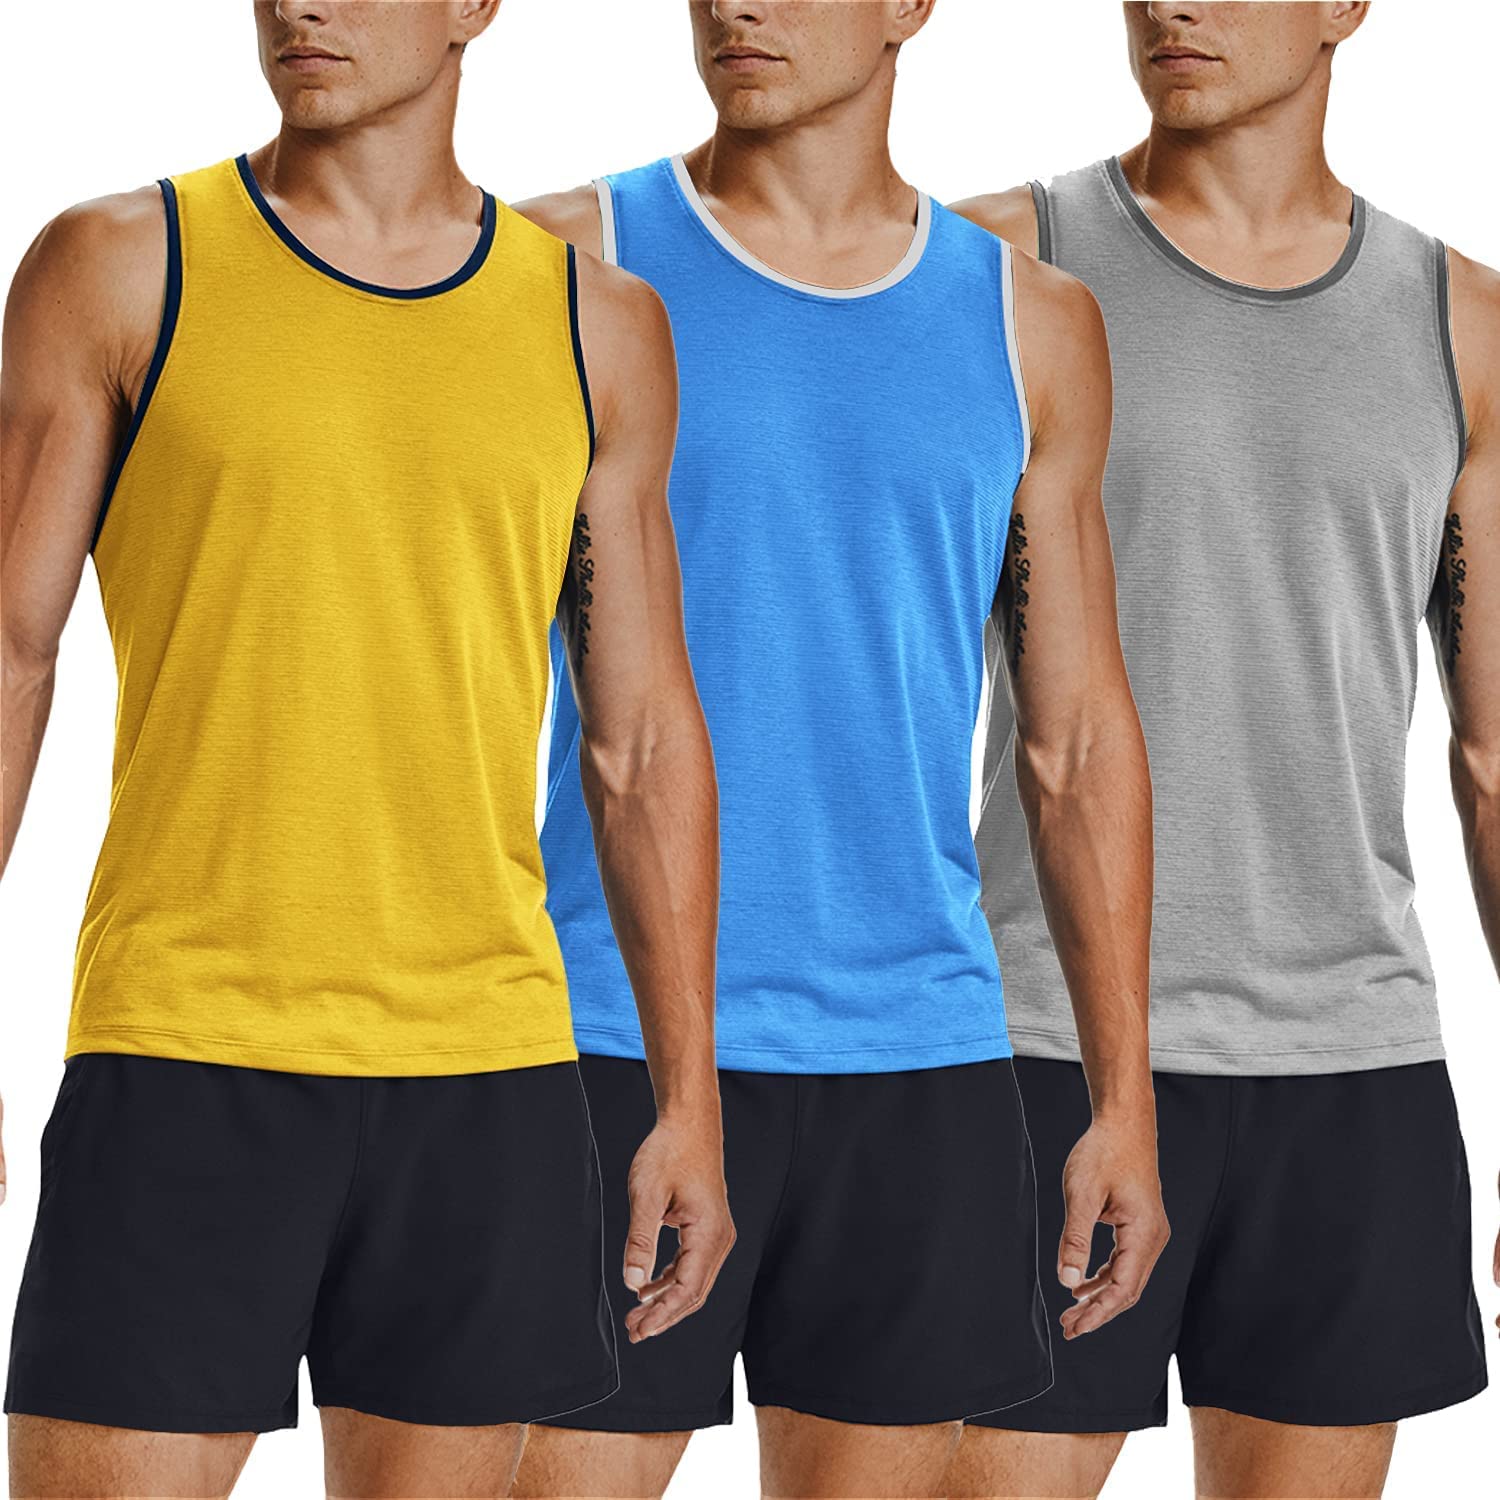  COOFANDY Men's 3 Pack Quick Dry Workout Tank Top Gym Muscle Tee  Fitness Bodybuilding Sleeveless T Shirt : Clothing, Shoes & Jewelry